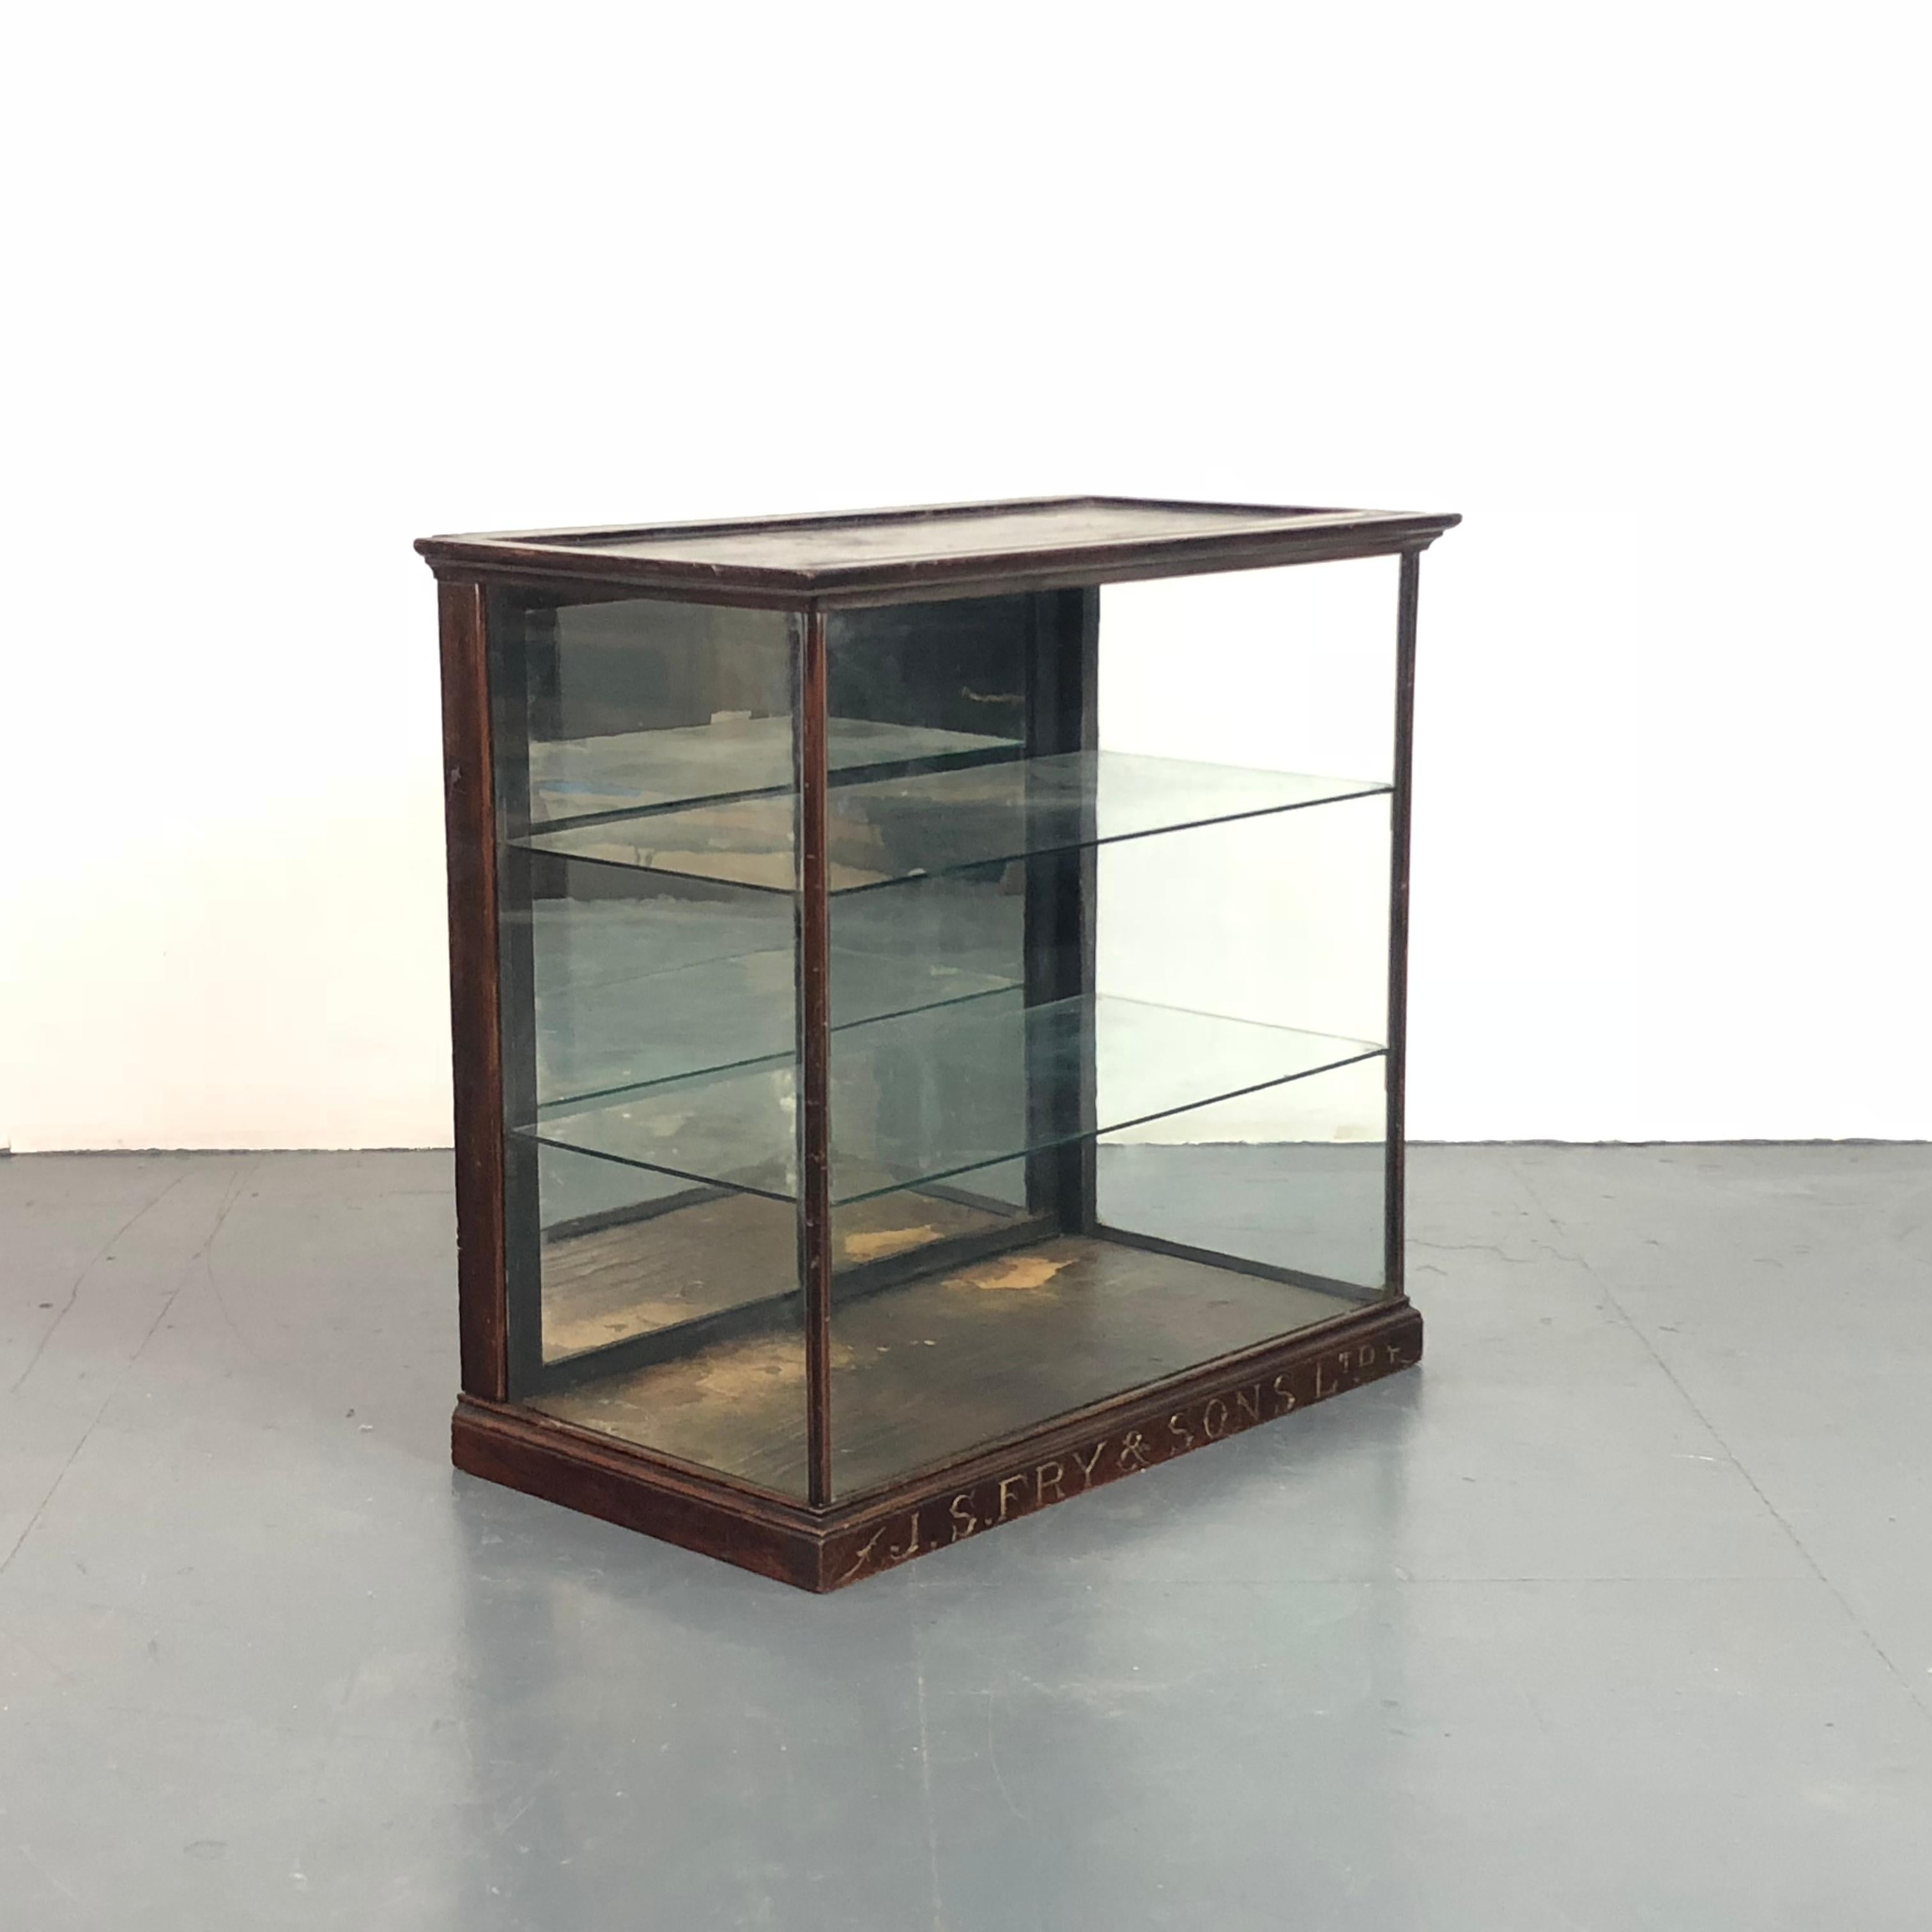 Wonderful glazed JS Fry & Sons display cabinet from the late 19th/early 20th century. This is a counter top piece. The interior is accessed through mirrored sliding doors on the back. It stands on a small engraved plinth and has two glass